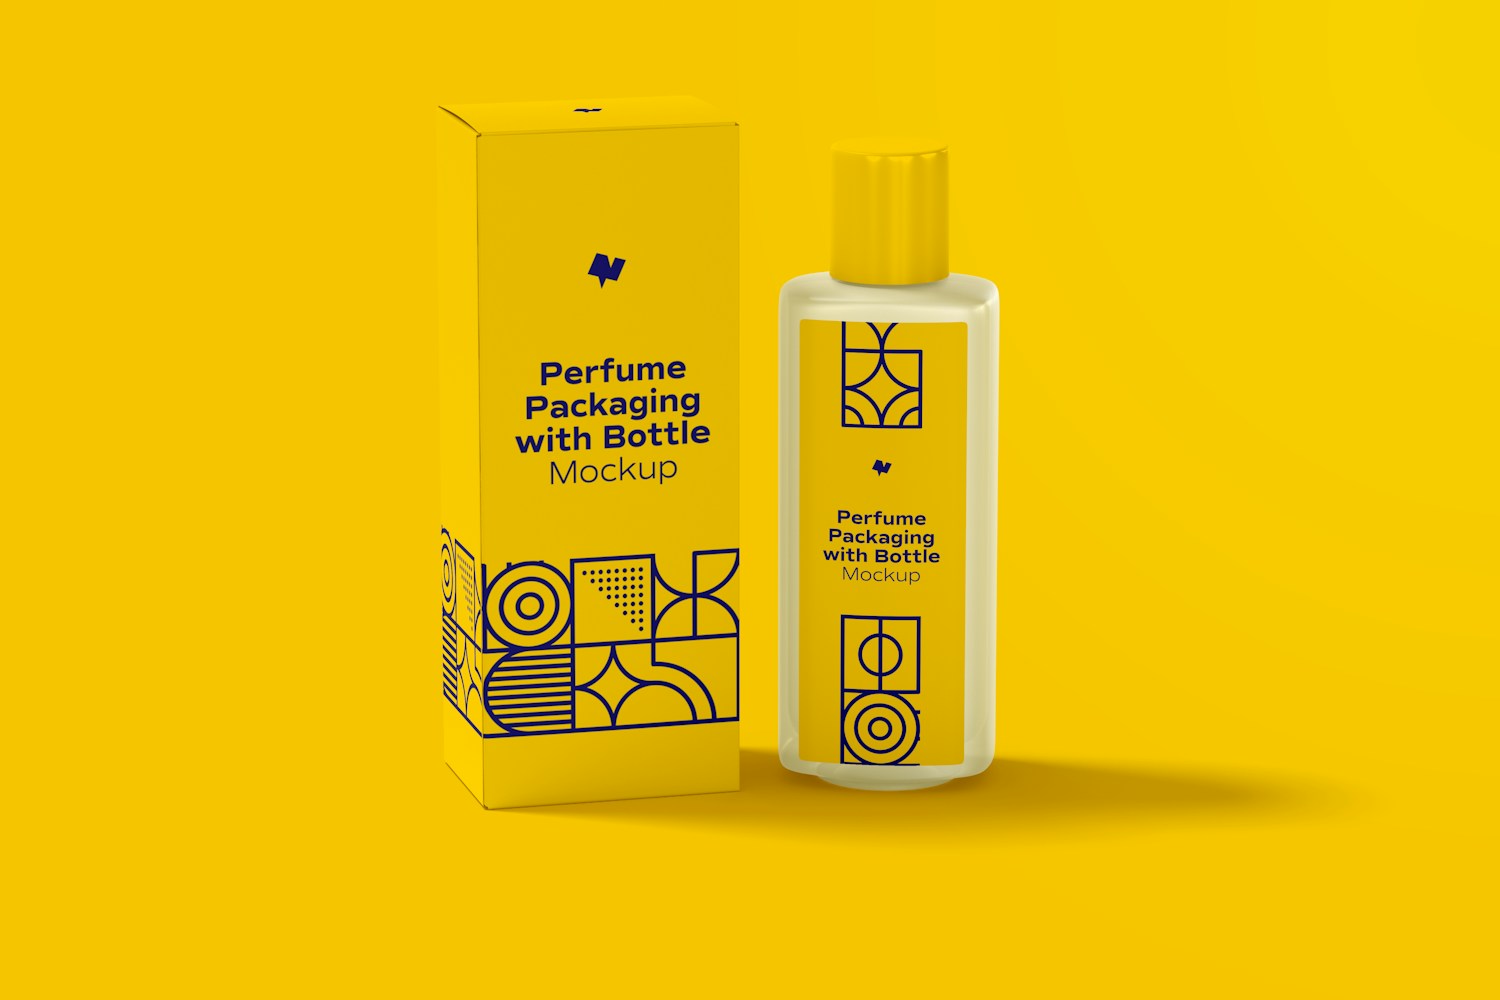 Use the bottle and packaging to show your design with a single concept.